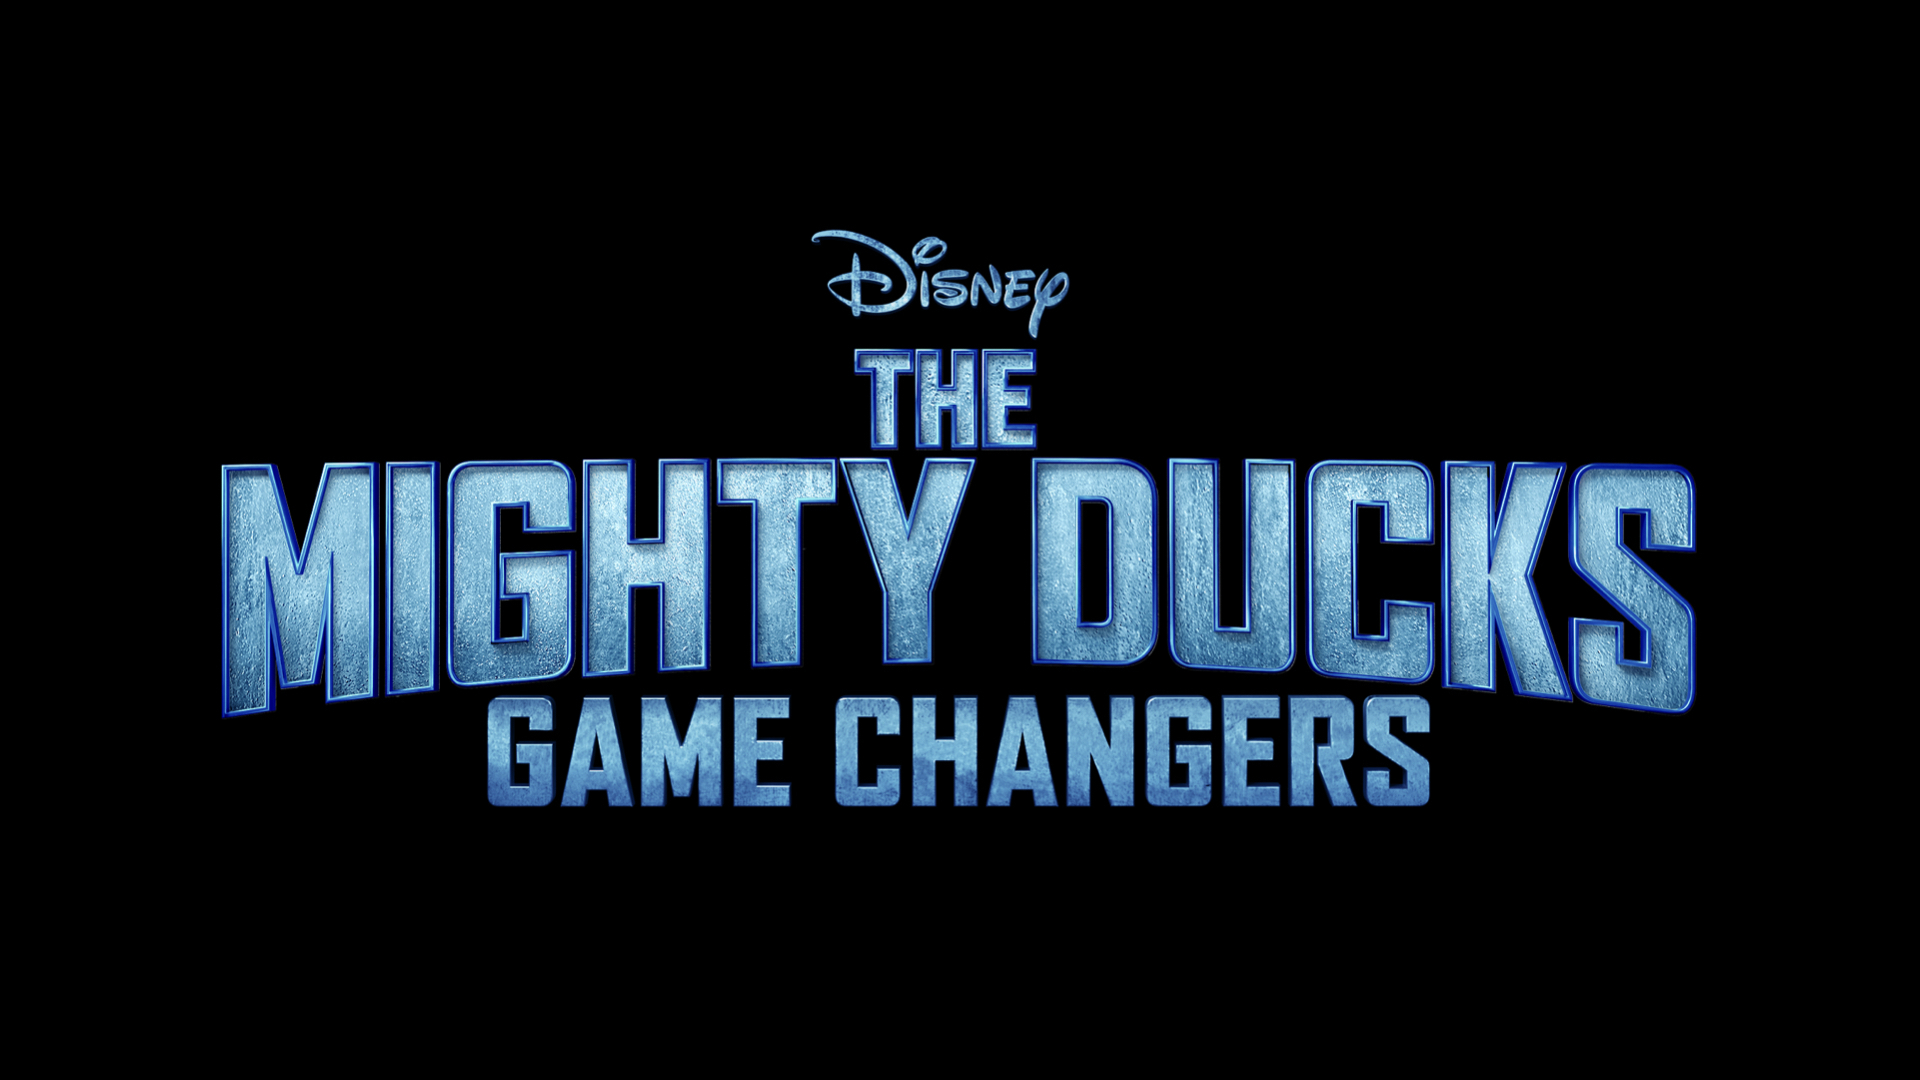 The Mighty Ducks: Game Changers Season 2 Release Date Revealed At Summer TCA